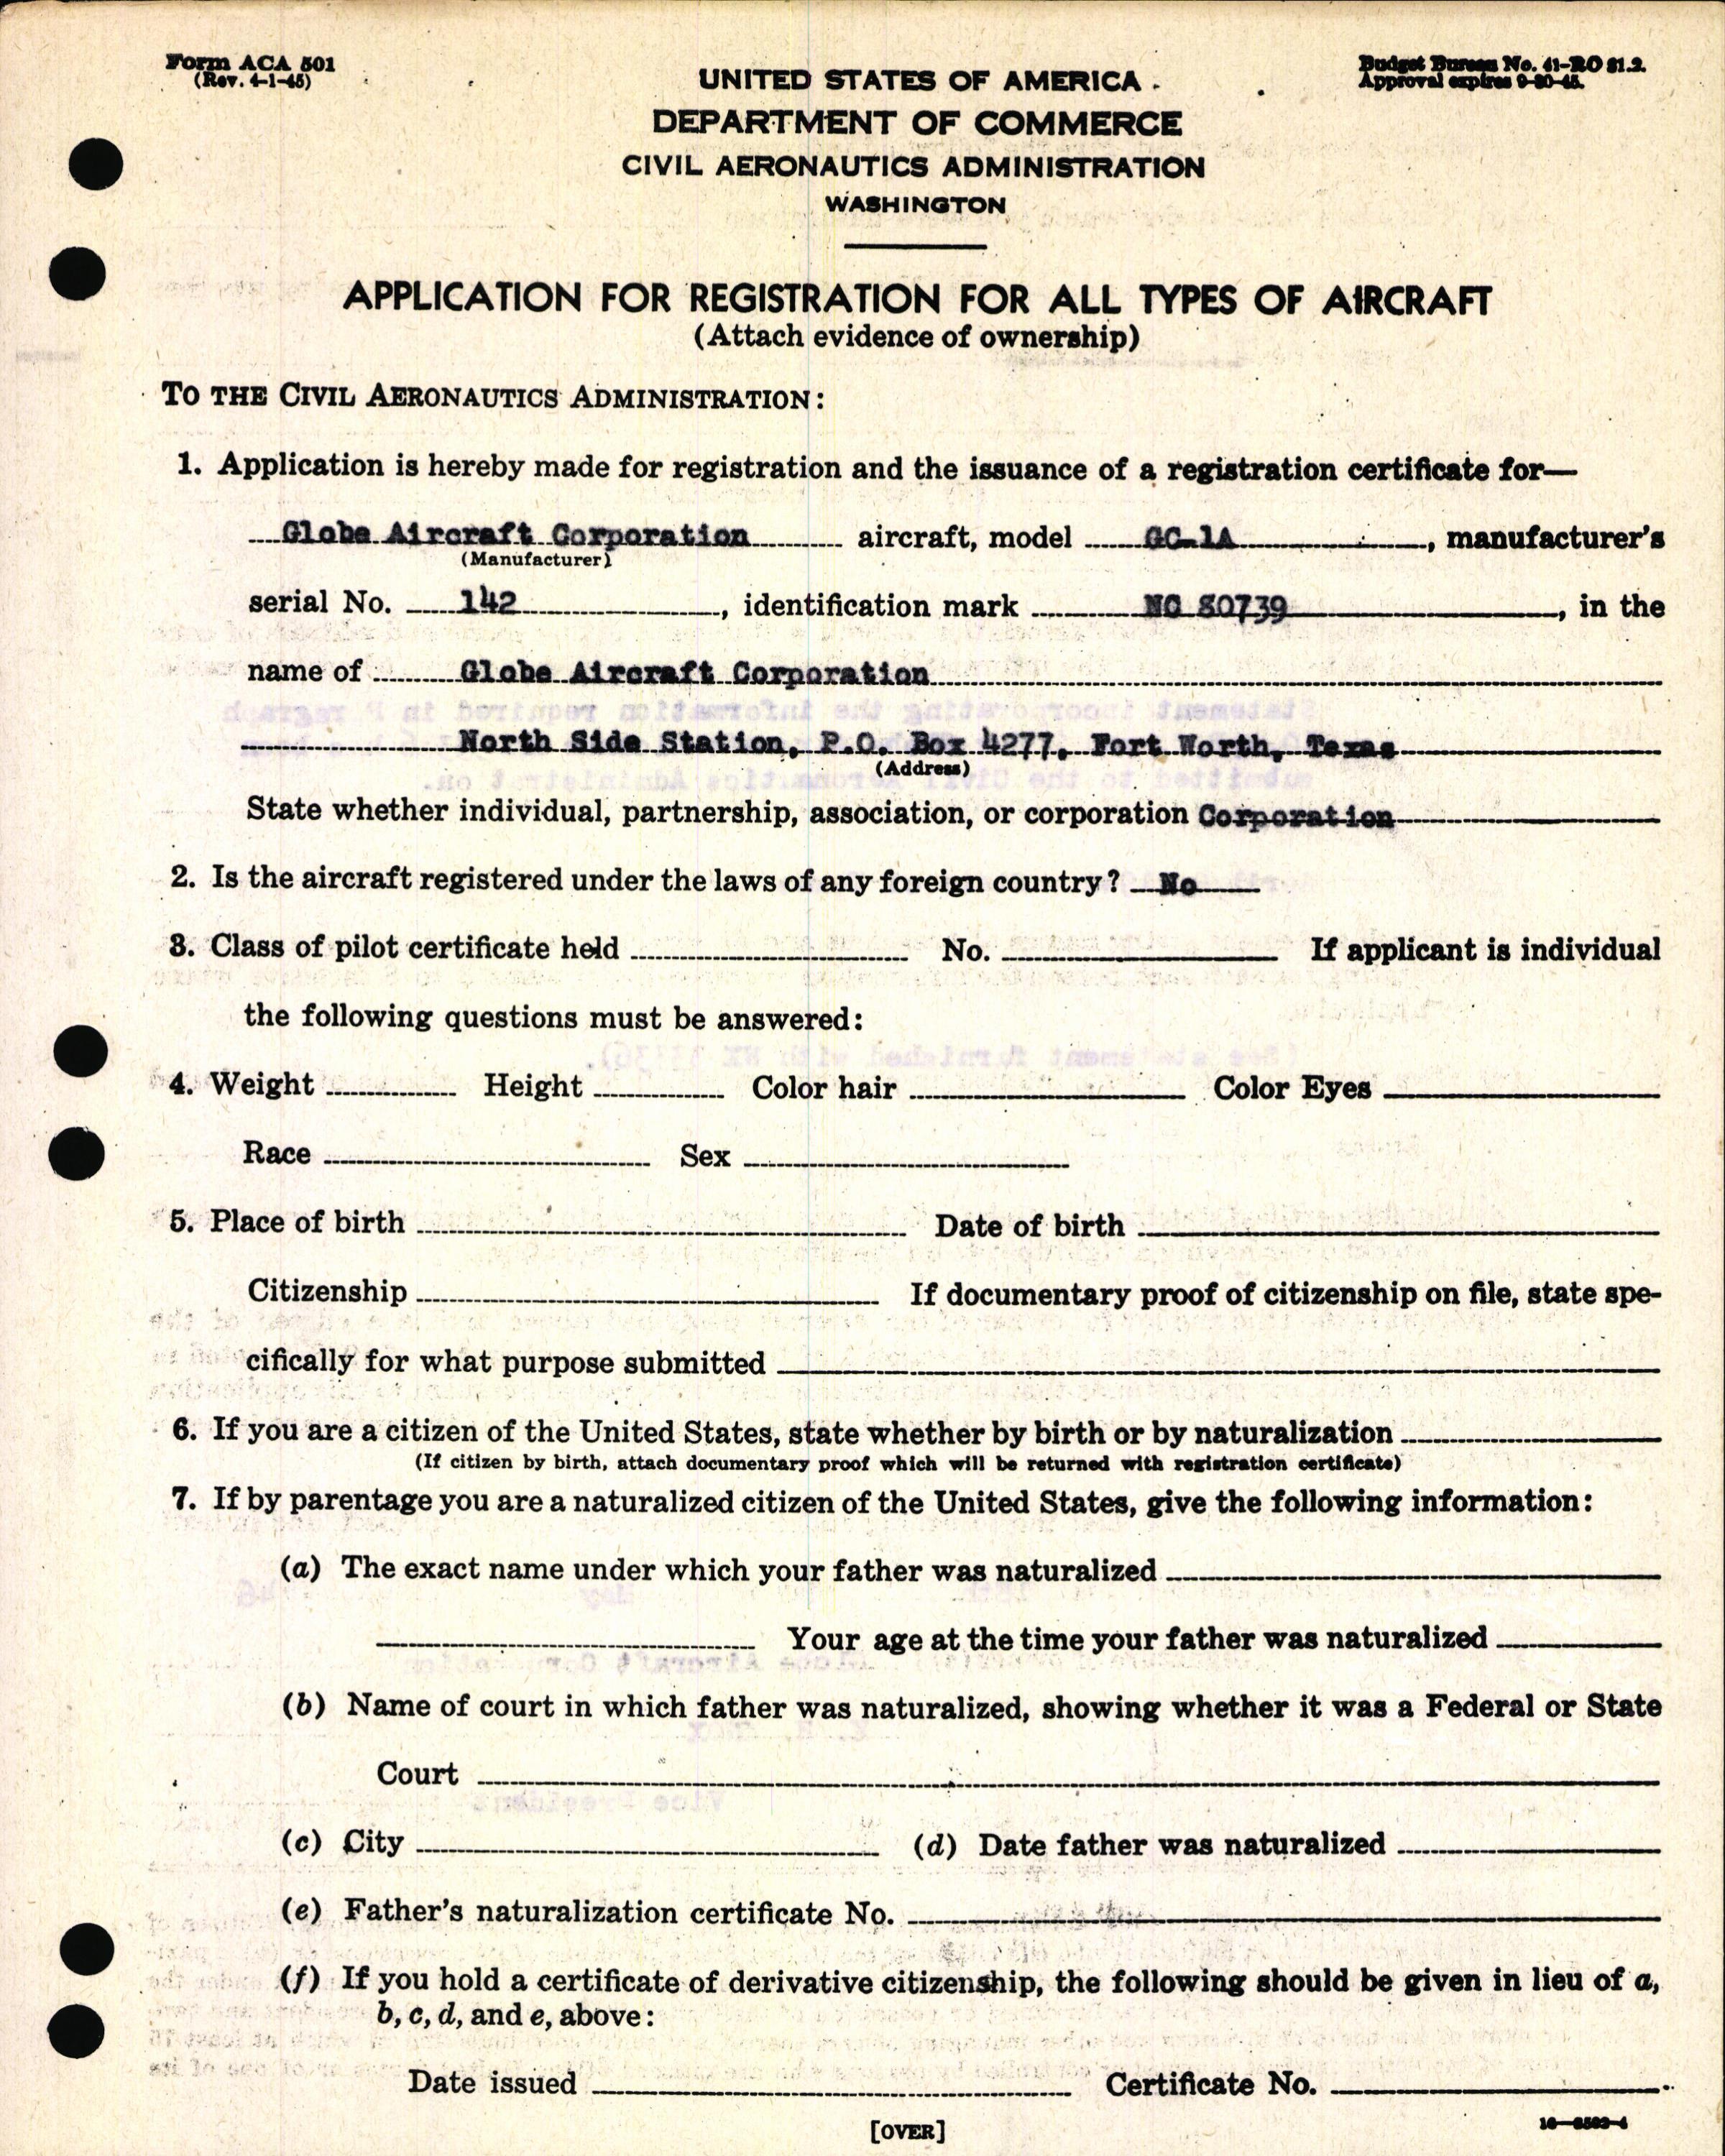 Sample page 5 from AirCorps Library document: Technical Information for Serial Number 142